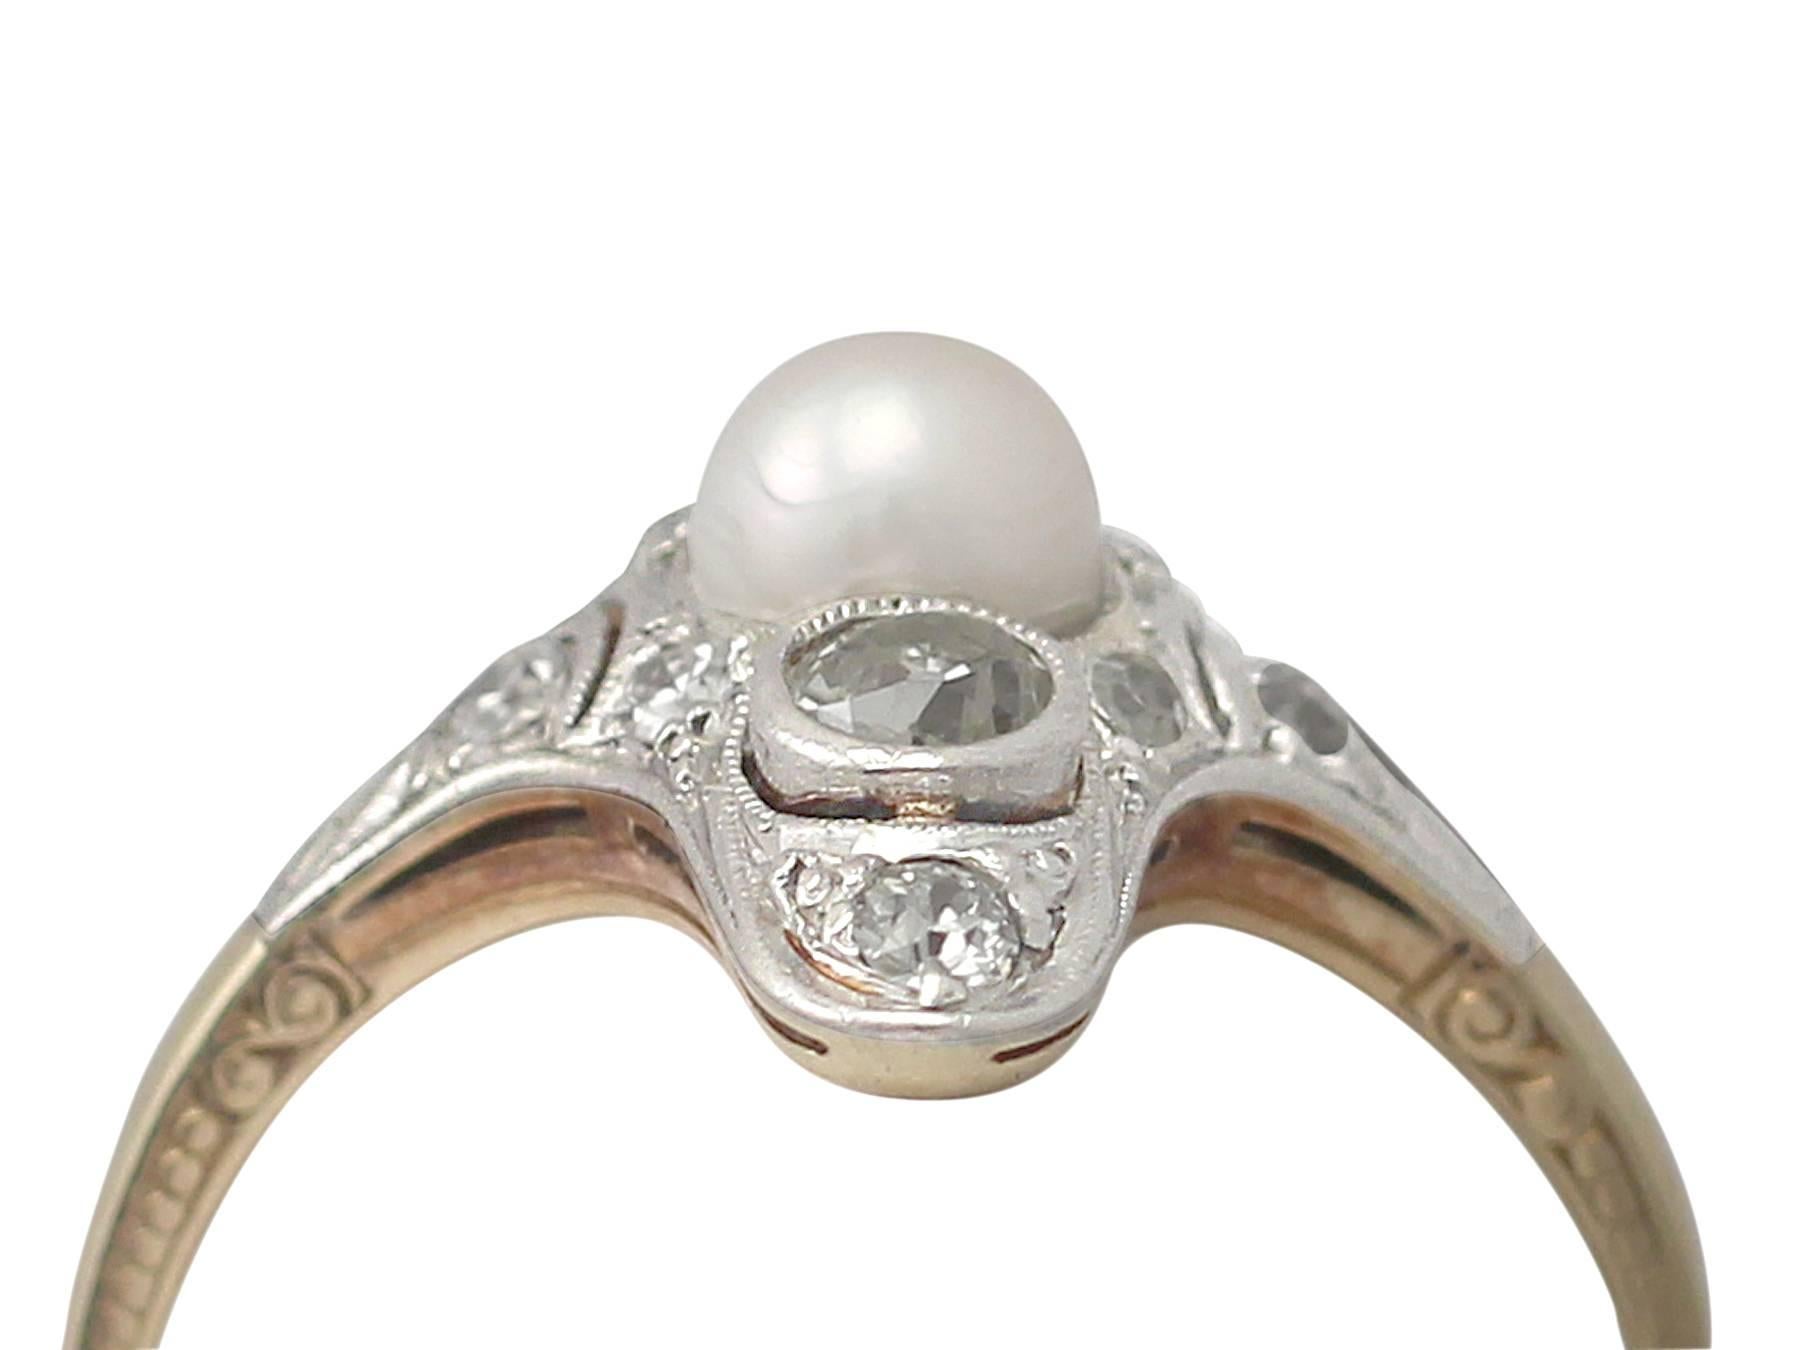 A fine and impressive antique pearl and 0.45 carat diamond, 14 karat yellow gold, 14 karat white gold set dress ring; part our antique jewelry and estate jewelry collections

This fine and impressive pearl and diamond ring has been crafted in 14k